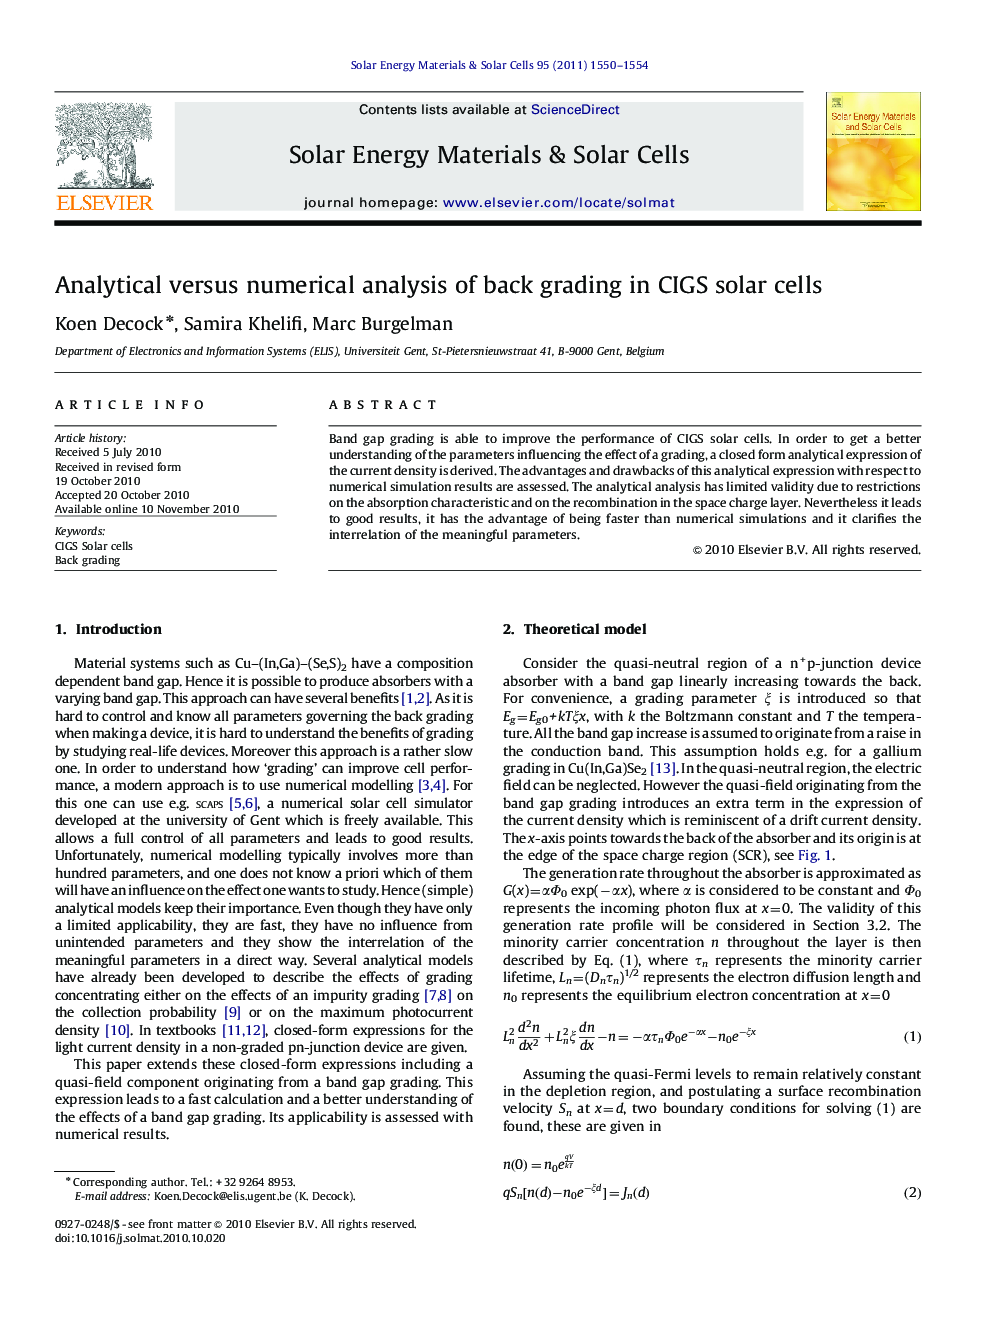 Analytical versus numerical analysis of back grading in CIGS solar cells